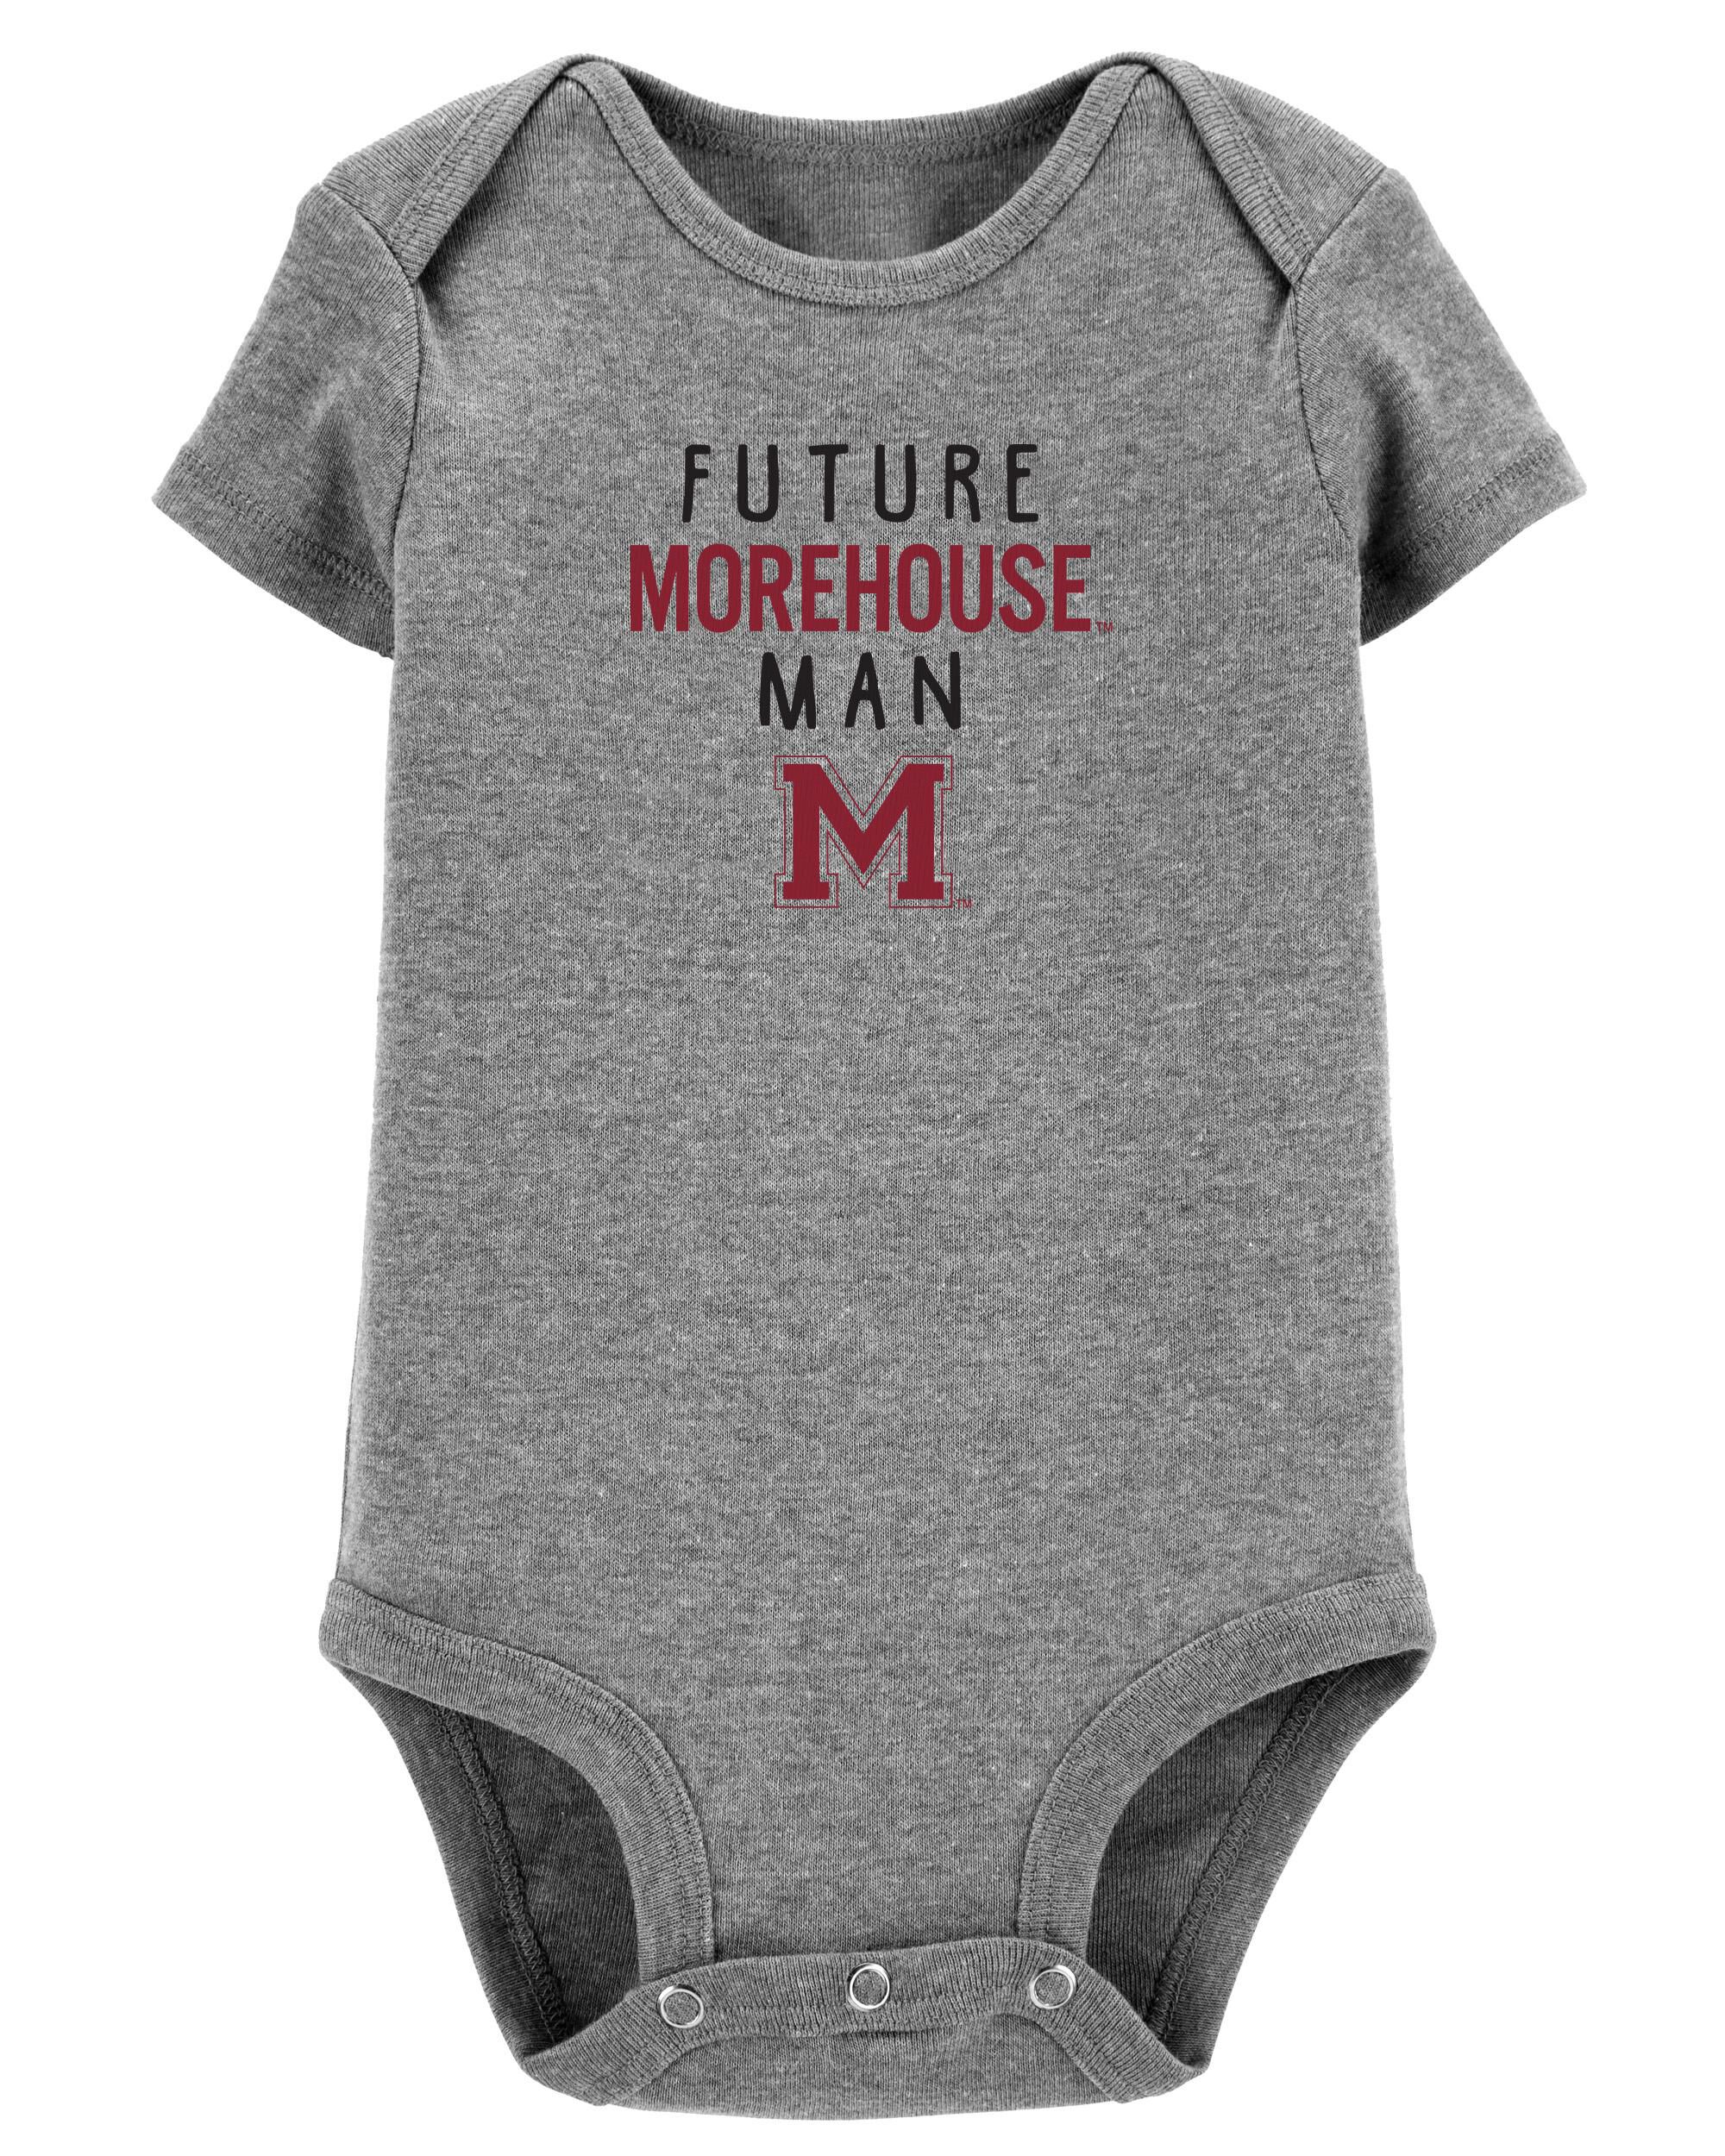 Morehouse College Tigers Baby Bodysuit by Creative Knitwear 